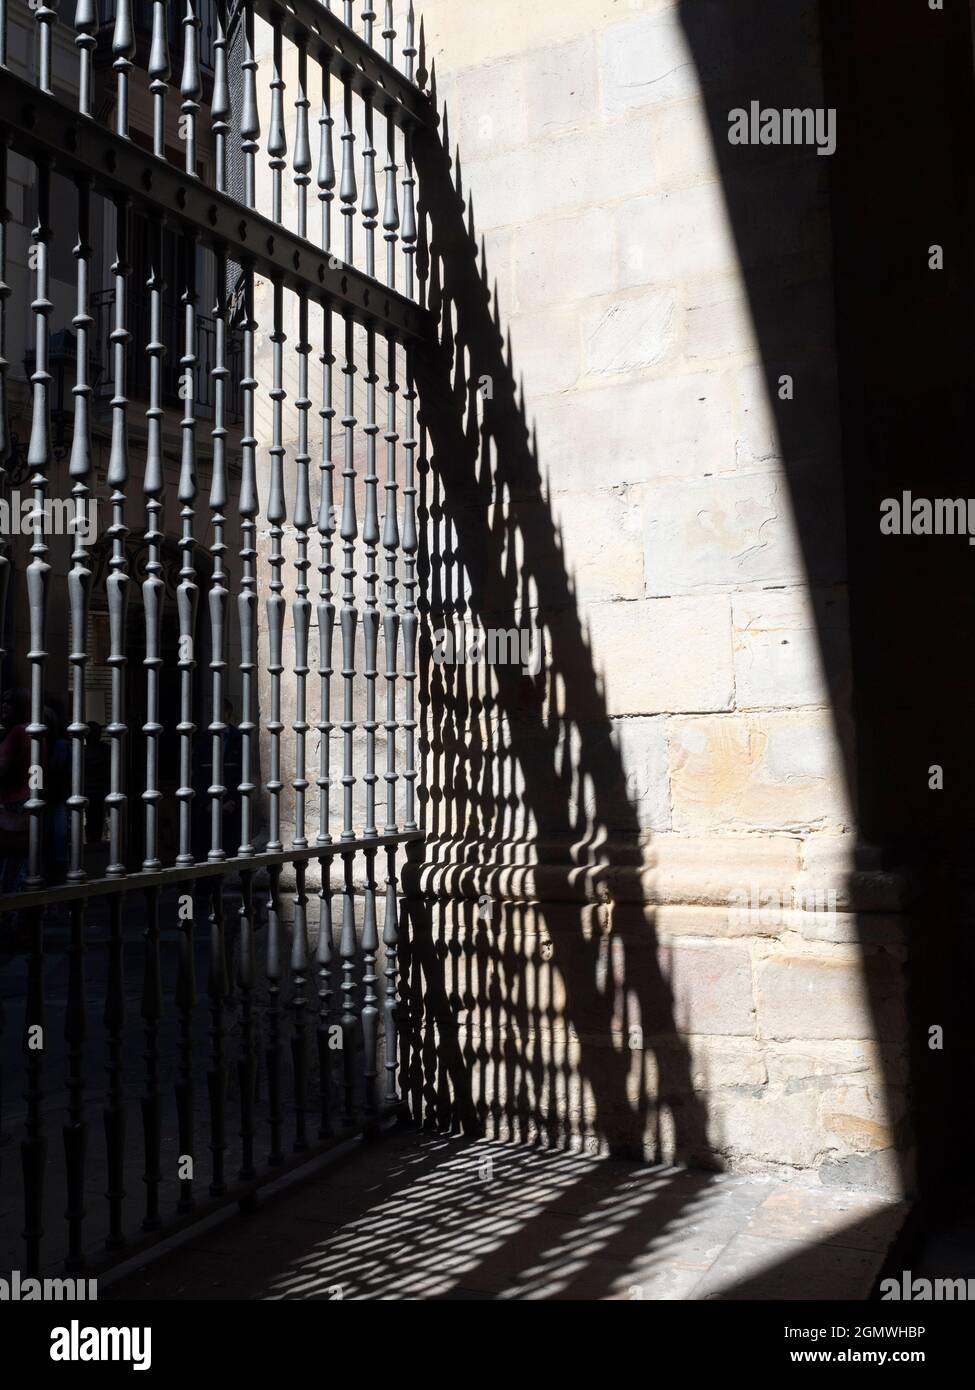 Bilbao, Spain - 8 September 2015; no people in view. Railings and shadows make abstract patterns outside Bilbao Cathedral in the Basque Country, Spain Stock Photo